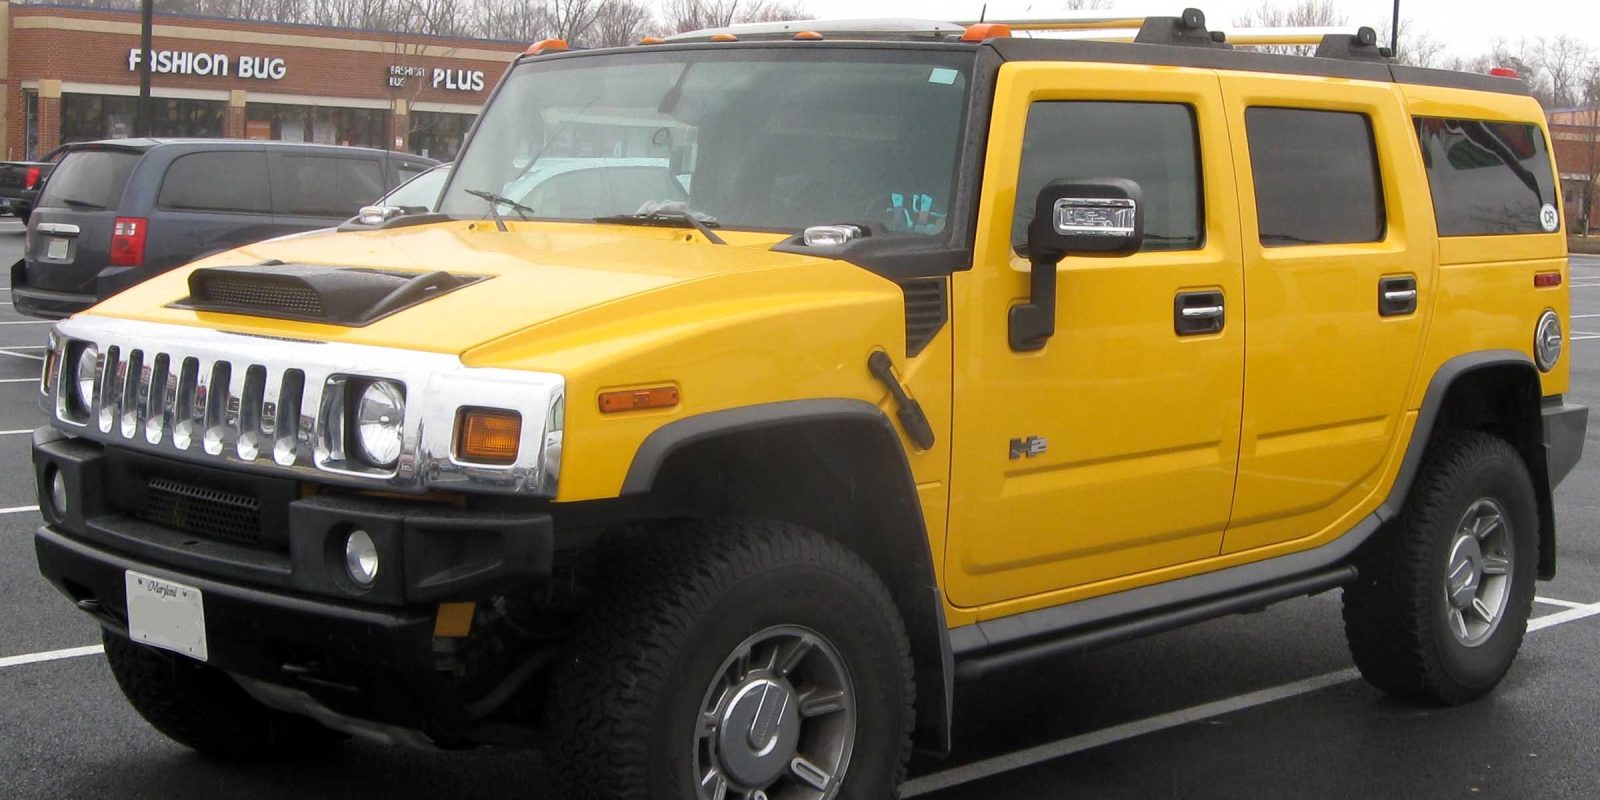 Is an electric Hummer a real possibility?